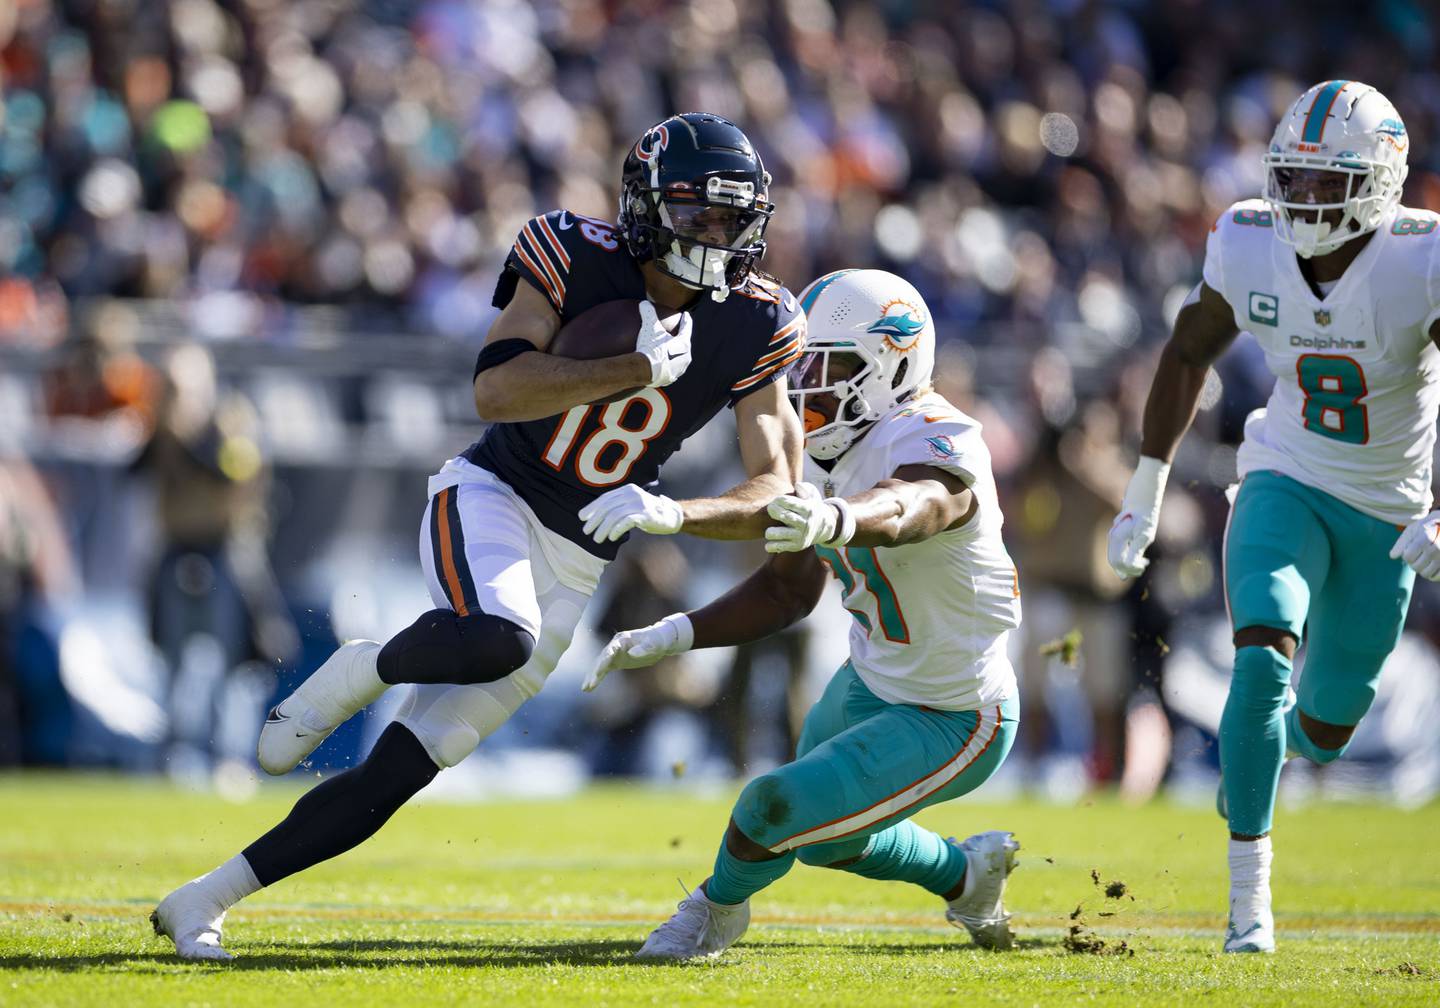 Bears wide receiver Dante Pettis (18) makes a catch against the Dolphins on Nov. 6, 2022, at Soldier Field.